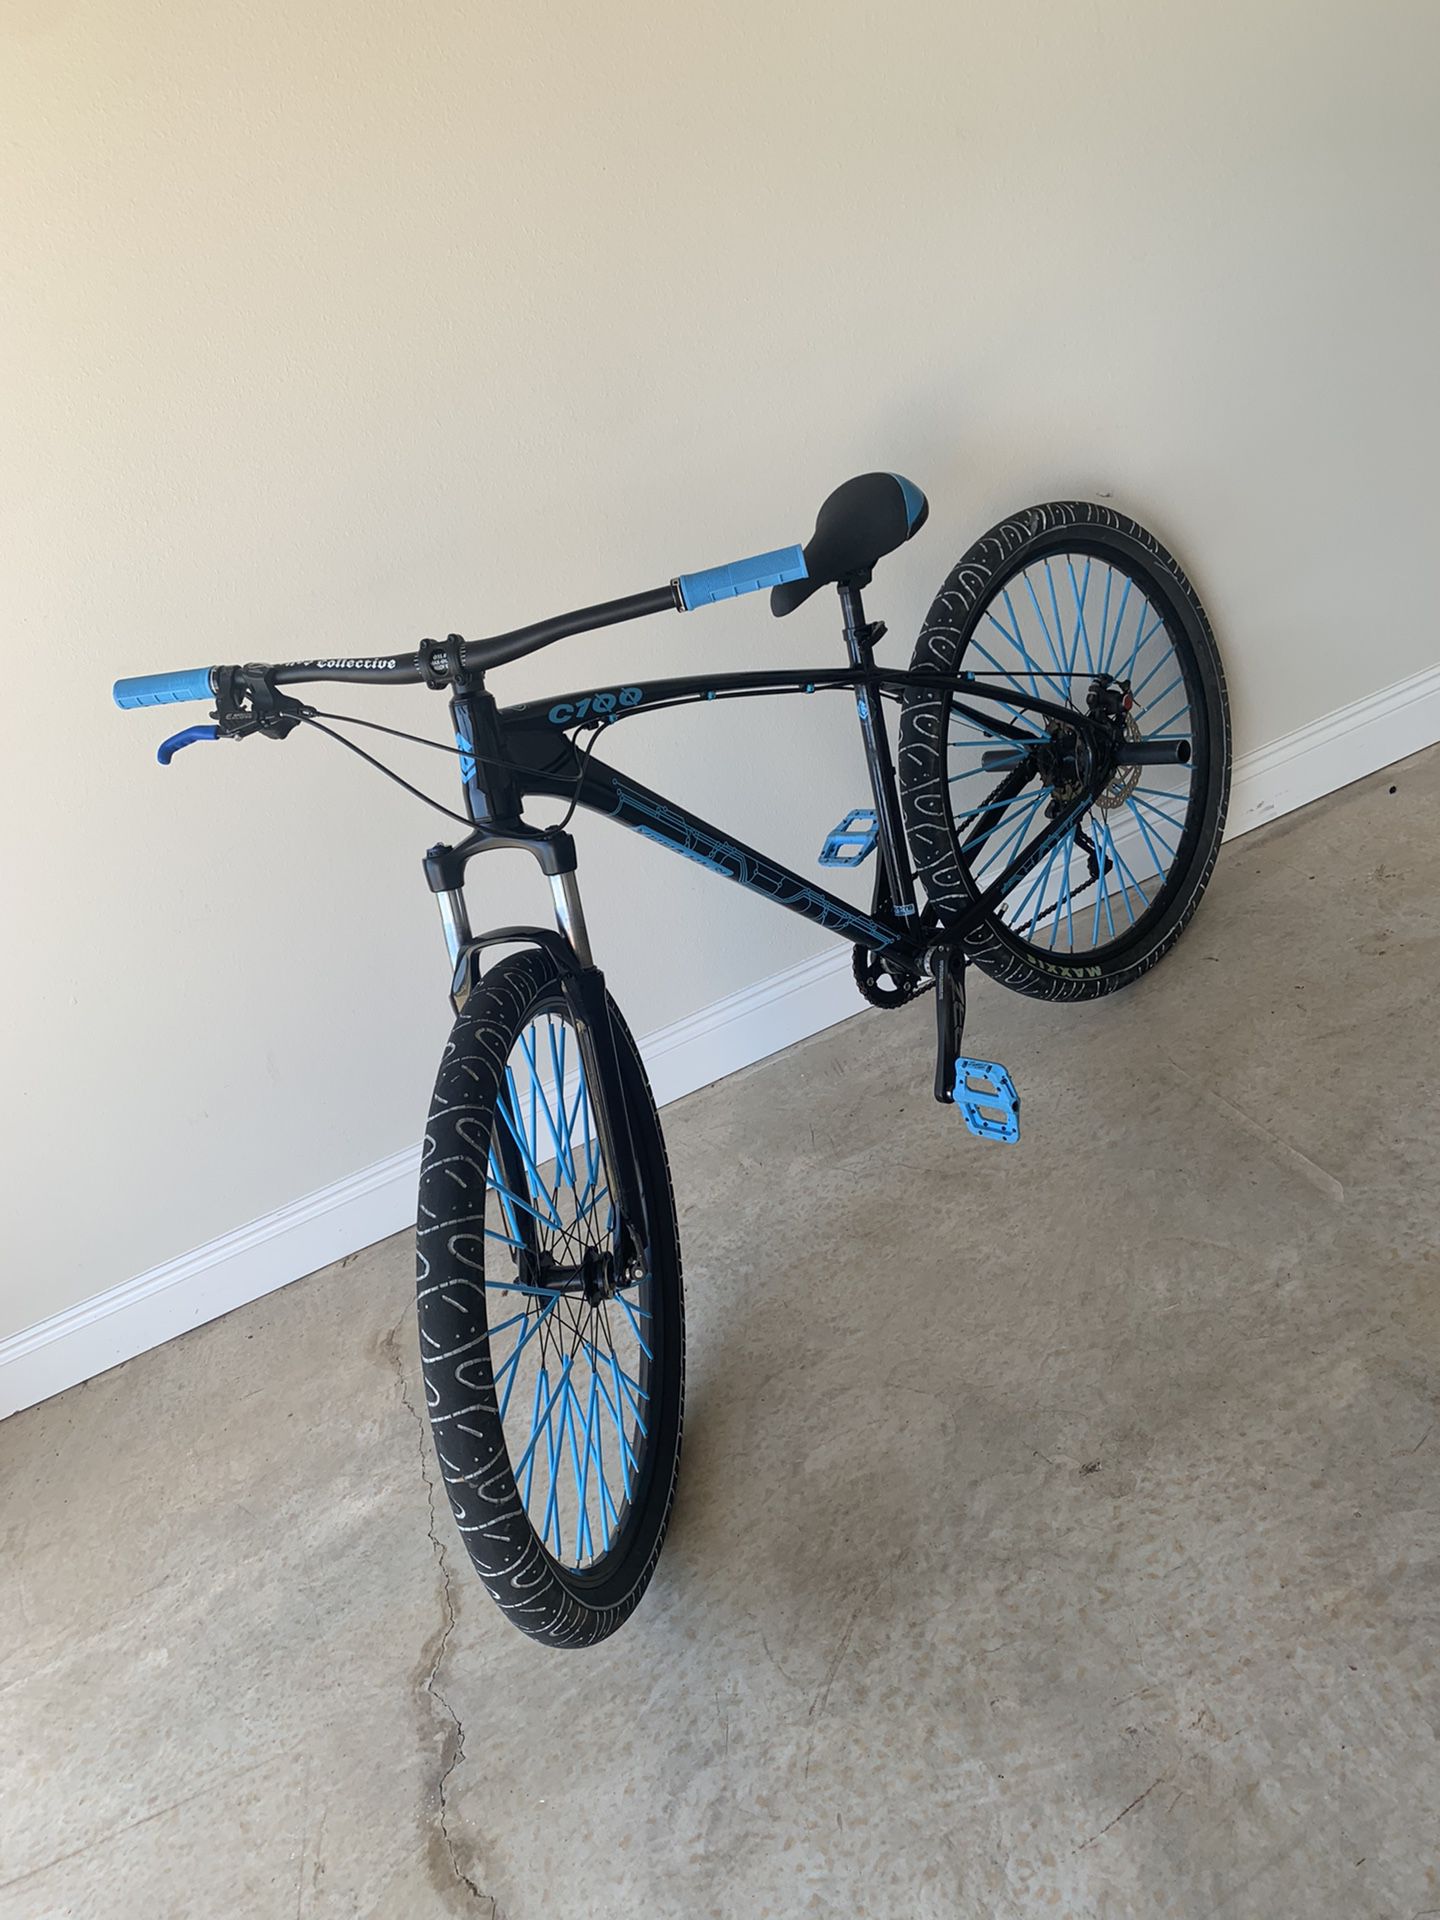 Pledge Stable Grape Collective Bikes c100 29" wheelie mtb for Sale in Conway, AR - OfferUp